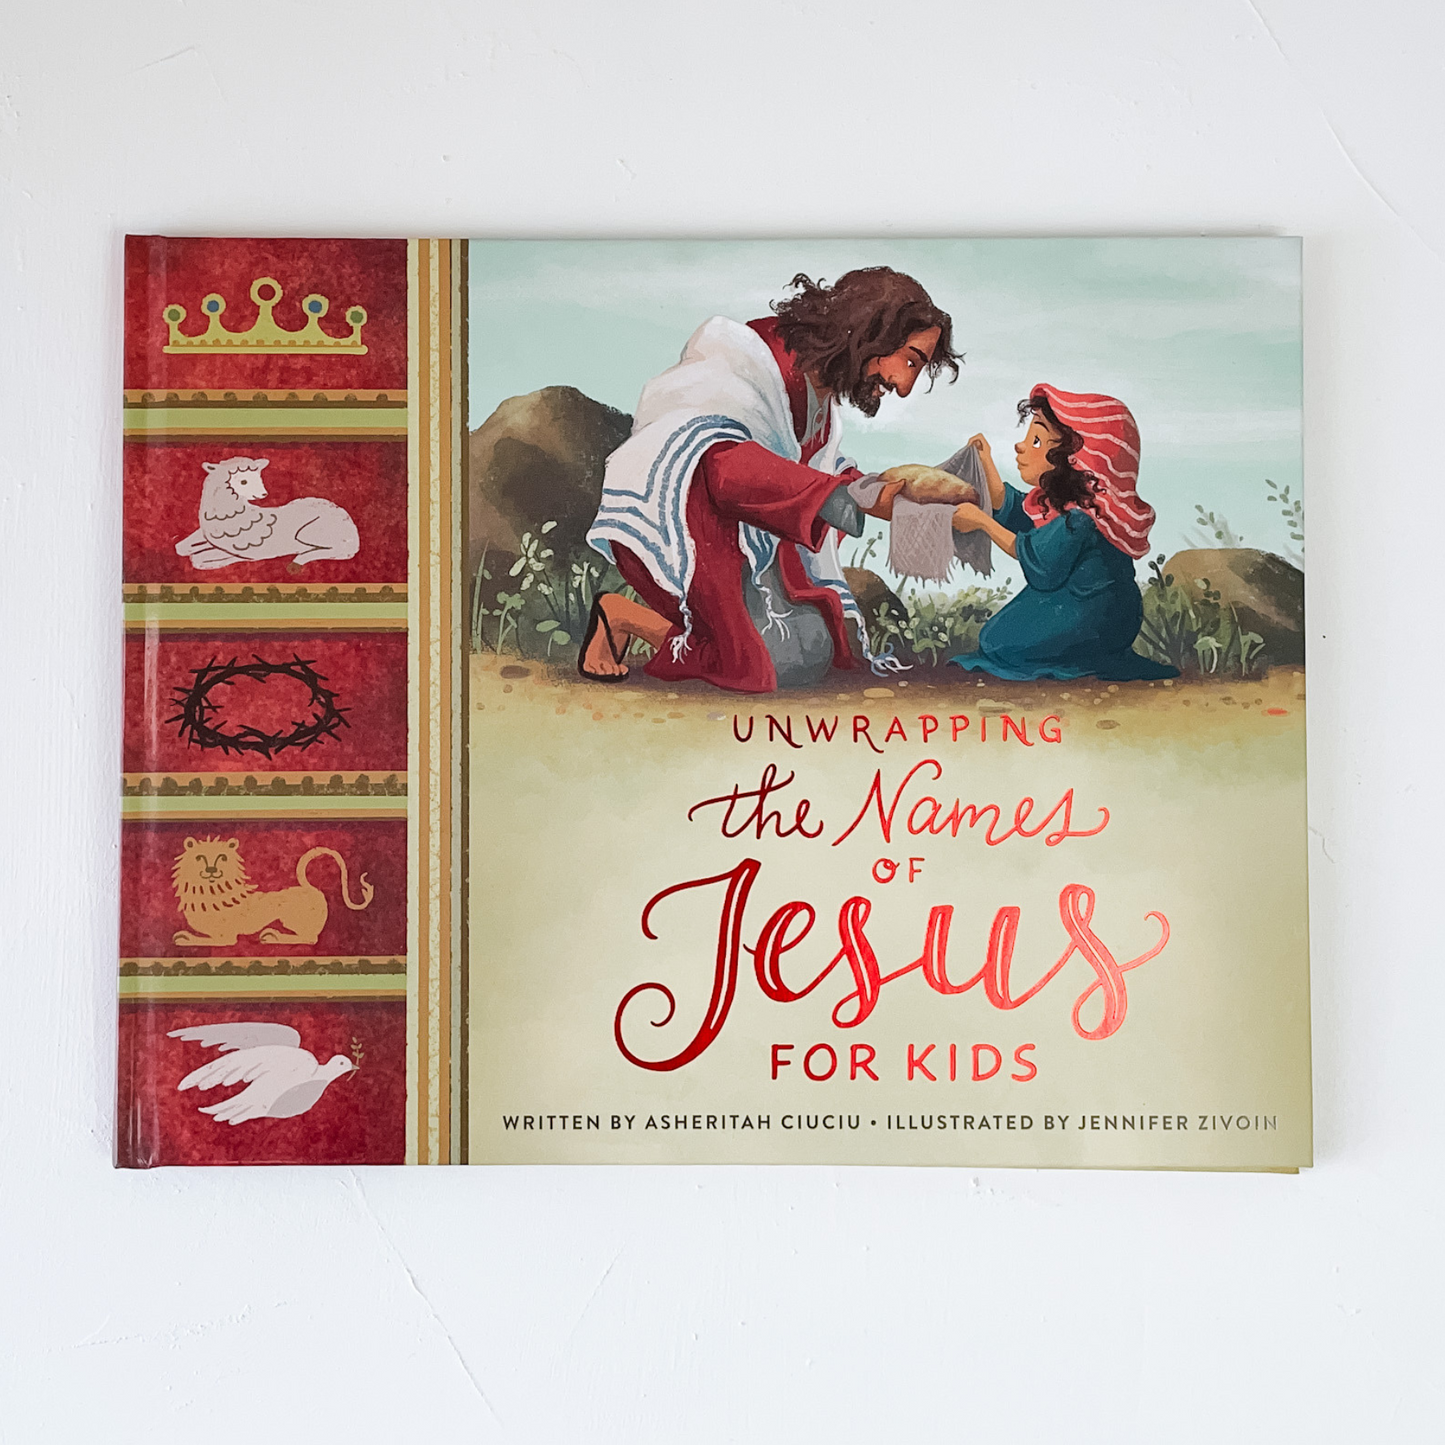 Signed Copy of Unwrapping the Names of Jesus for Kids